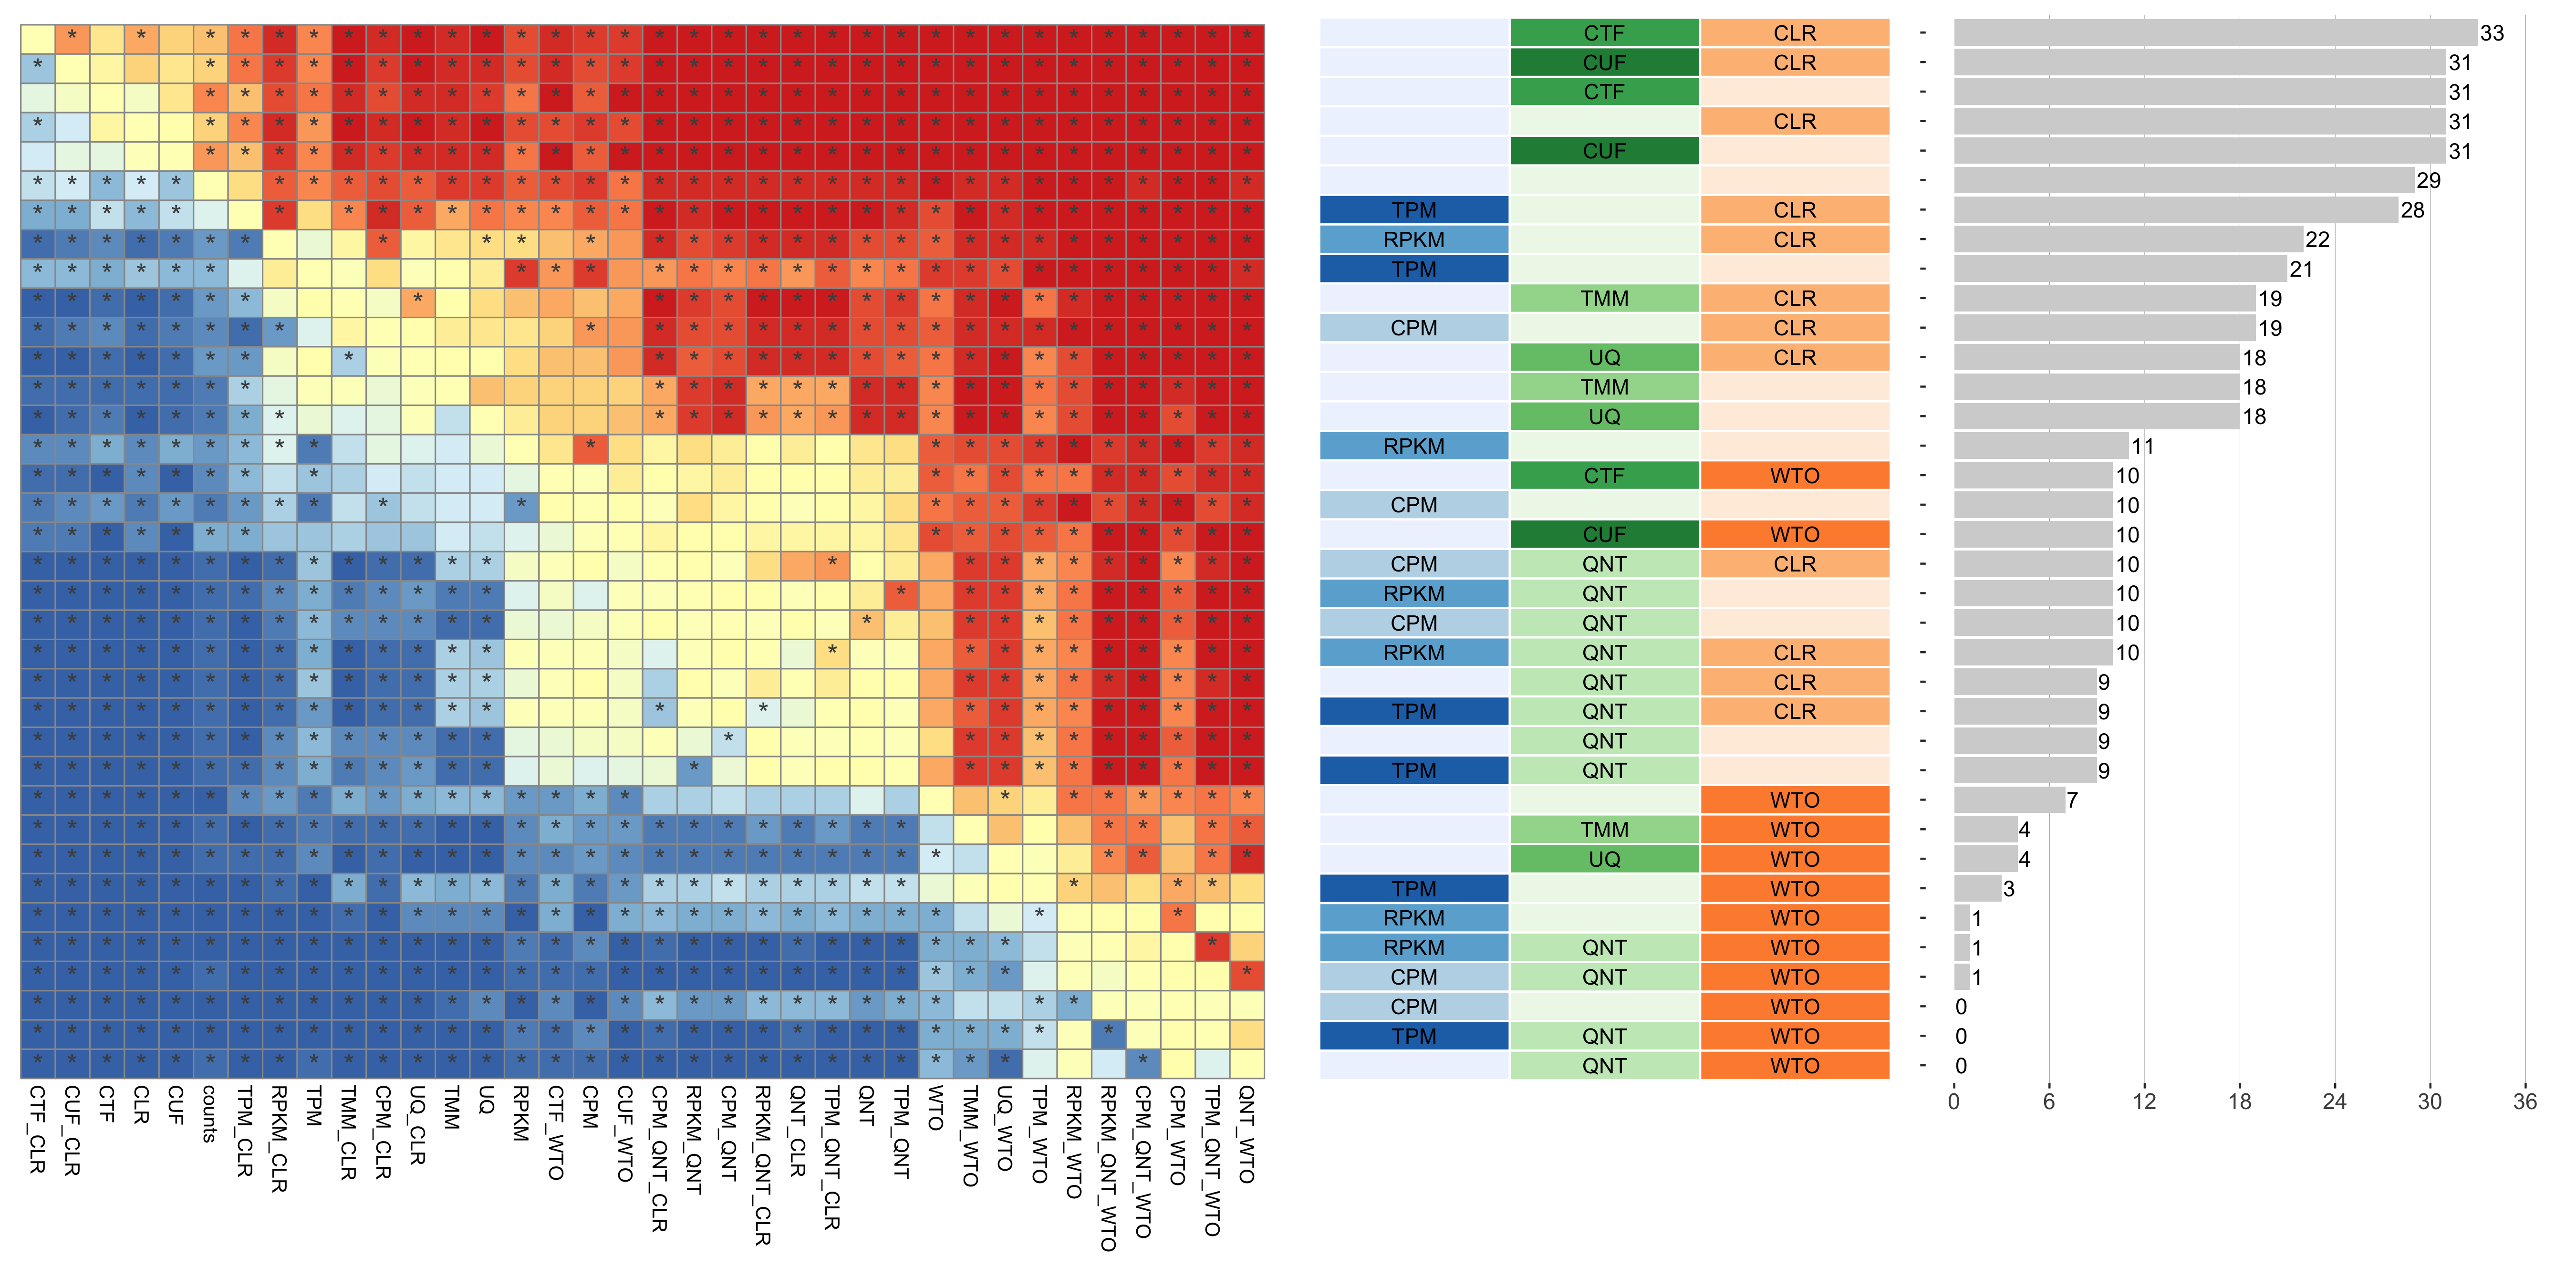 **Dataset-level pairwise comparison of workflow performance.** (**left**) The heatmap shows the relative performance of a pair of workflows, corresponding to a row and a column, directly compared to each other for the GTEx datasets based on the tissue-naive gold standard. The color in each cell (row, column) represents the proportion of datasets for which the workflow along the row has a higher log2(p20r/prior) than the workflow along the column. Comparisons that are statistically significant (corrected p < 0.01) based on a paired Wilcoxon test are marked with an asterisk. (**middle**) The workflows (rows) are described in terms of the specific method used in the within-sample normalization (blues), between-sample normalization (greens), and network transformation (oranges) stages. (**right**) The barplot shows the number of times each workflow was significantly greater than another workflow.